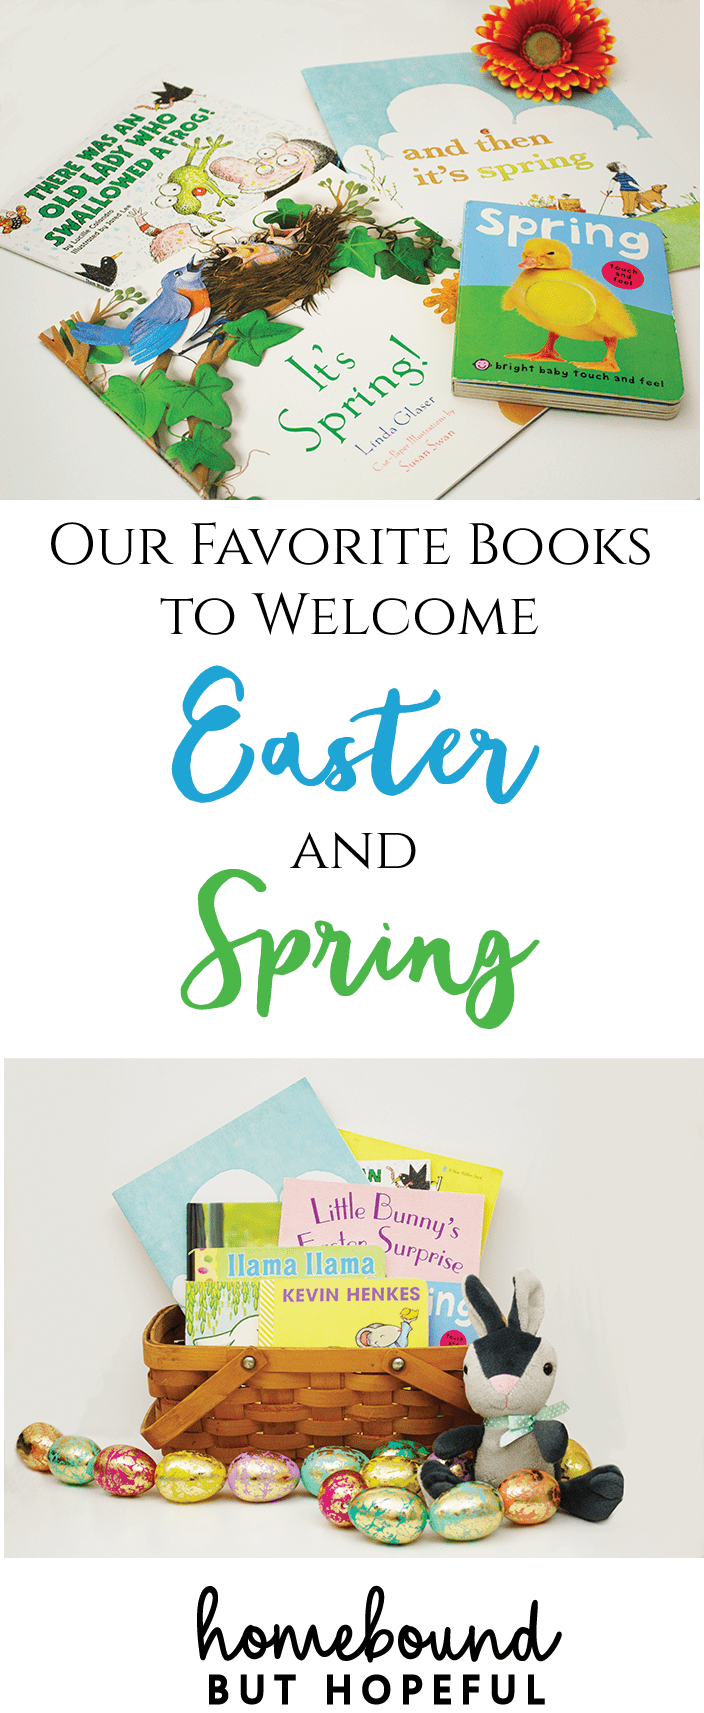 Now that winter seems to finally have passed, we're anxious to welcome spring and the Easter holiday. Check out the list of our favorite kid's books for the season, with selections for all ages. Easter | Spring | Kid's Lit | Children's Books | Reading | Picture Books